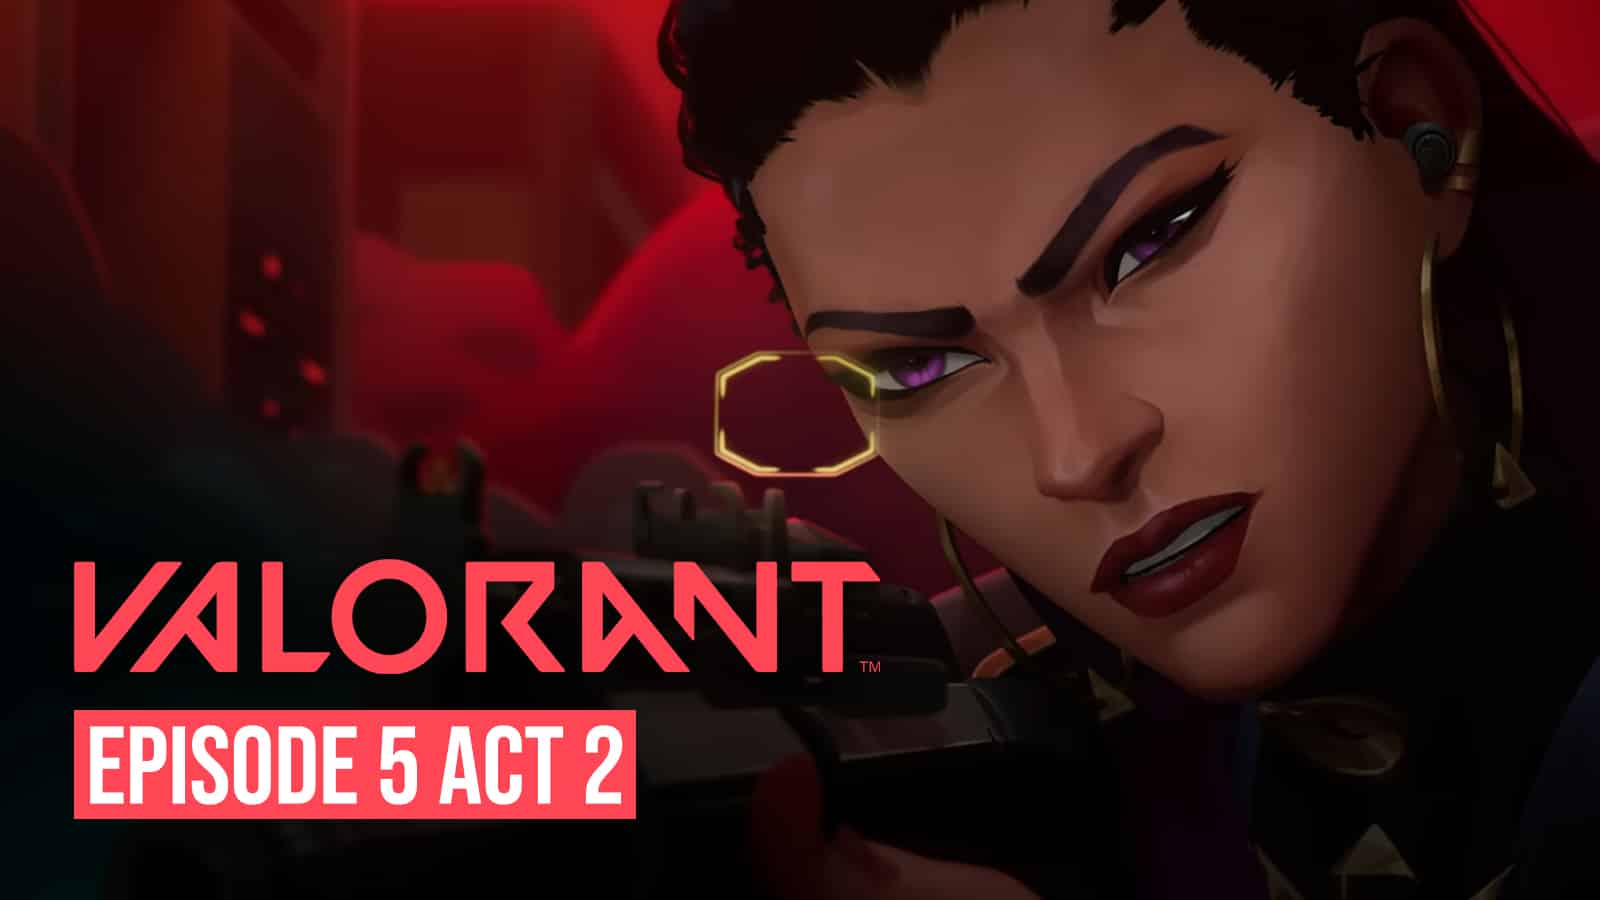 All About Valorant Episode 5 - News